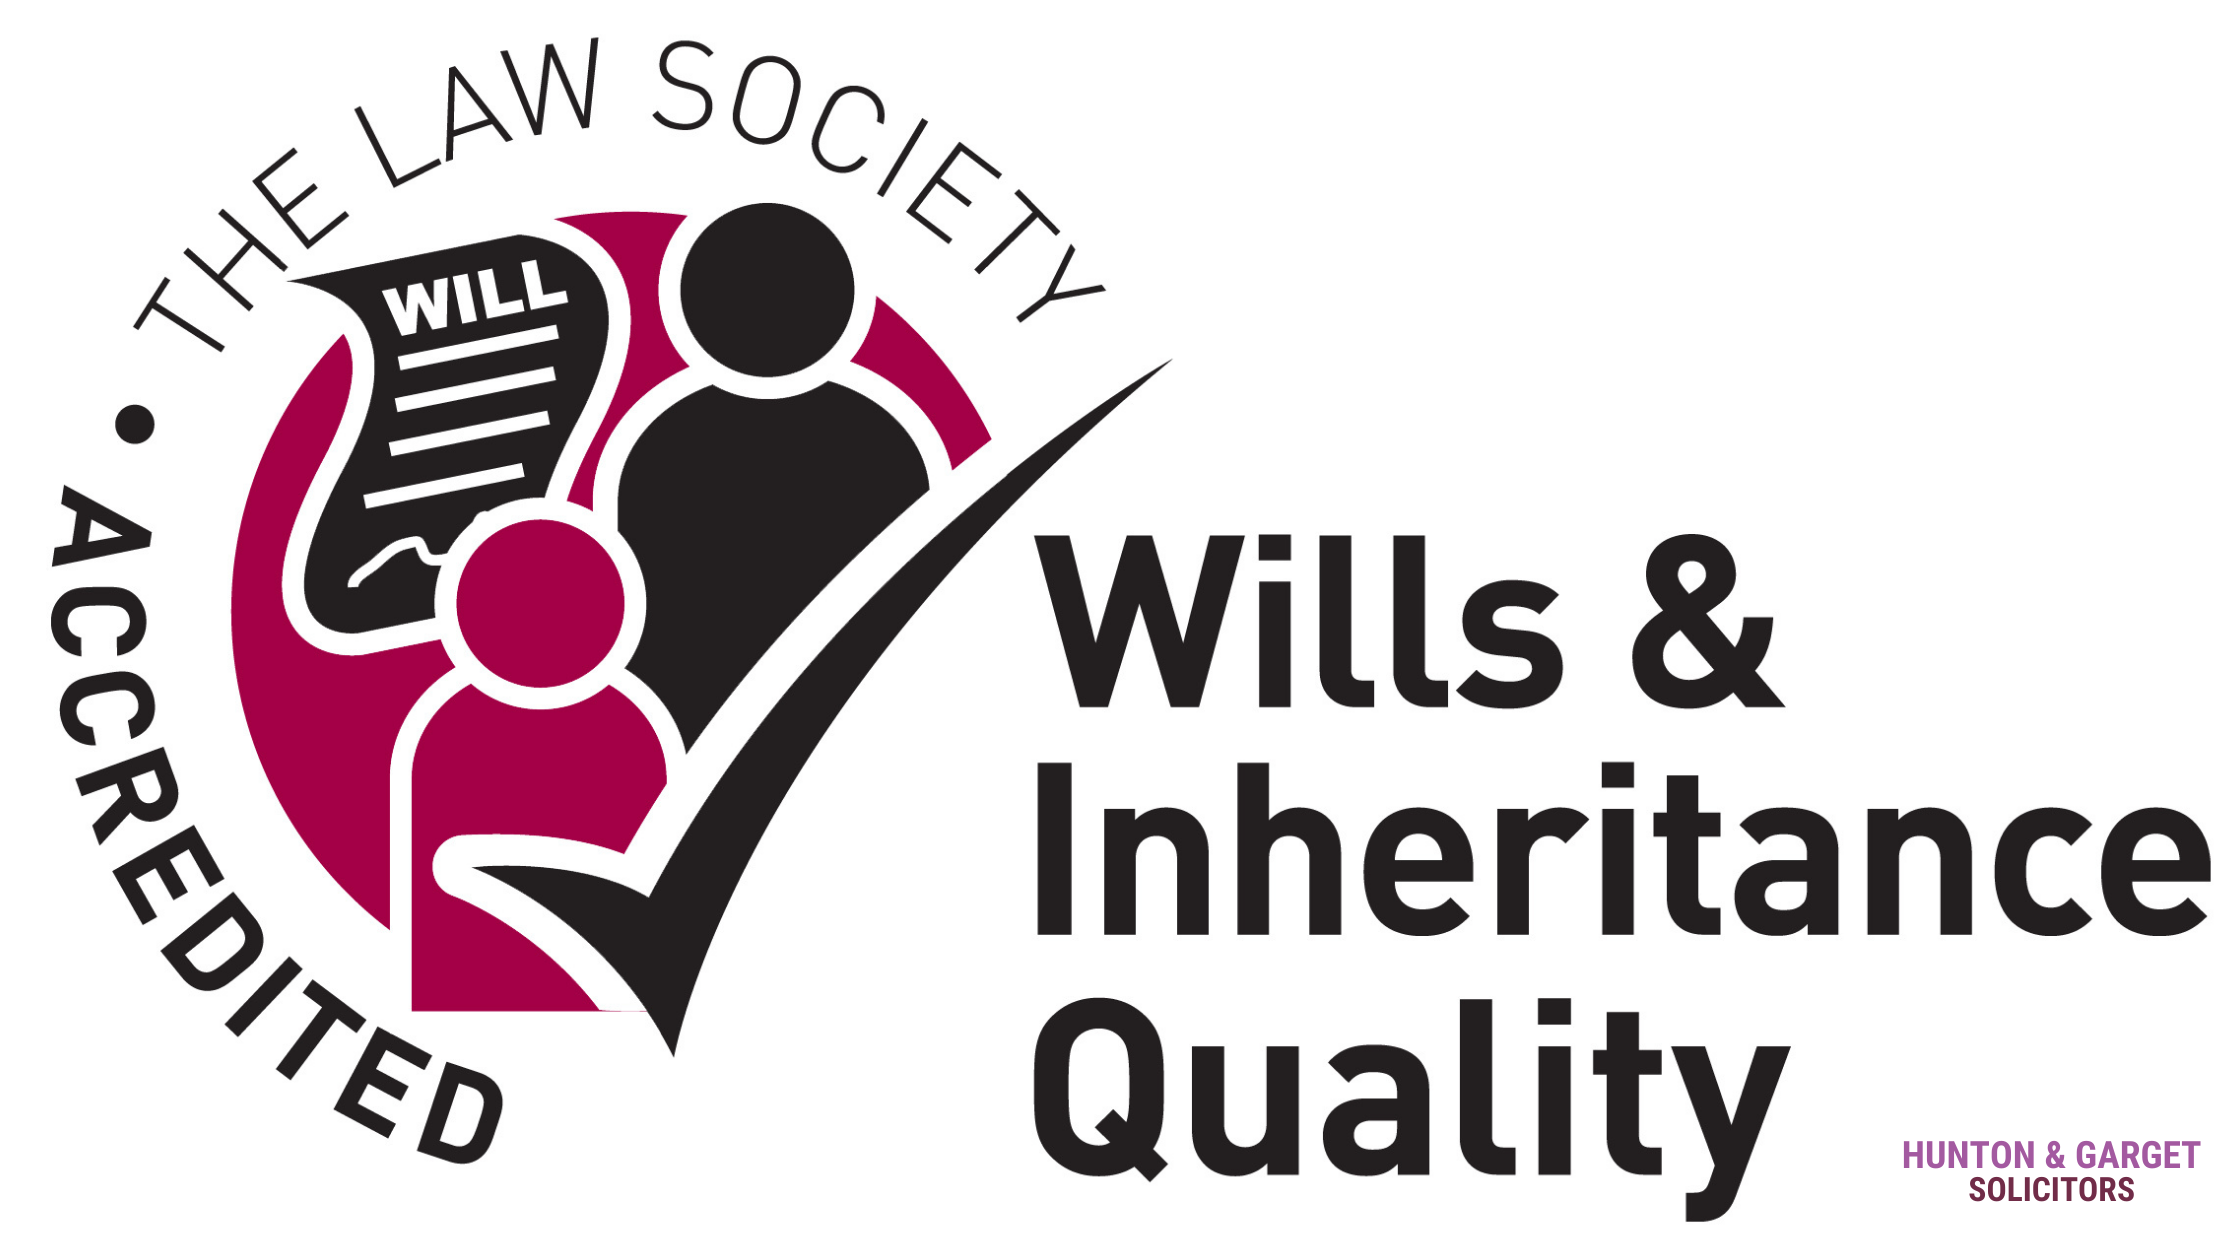 The importance of WIQS accreditation